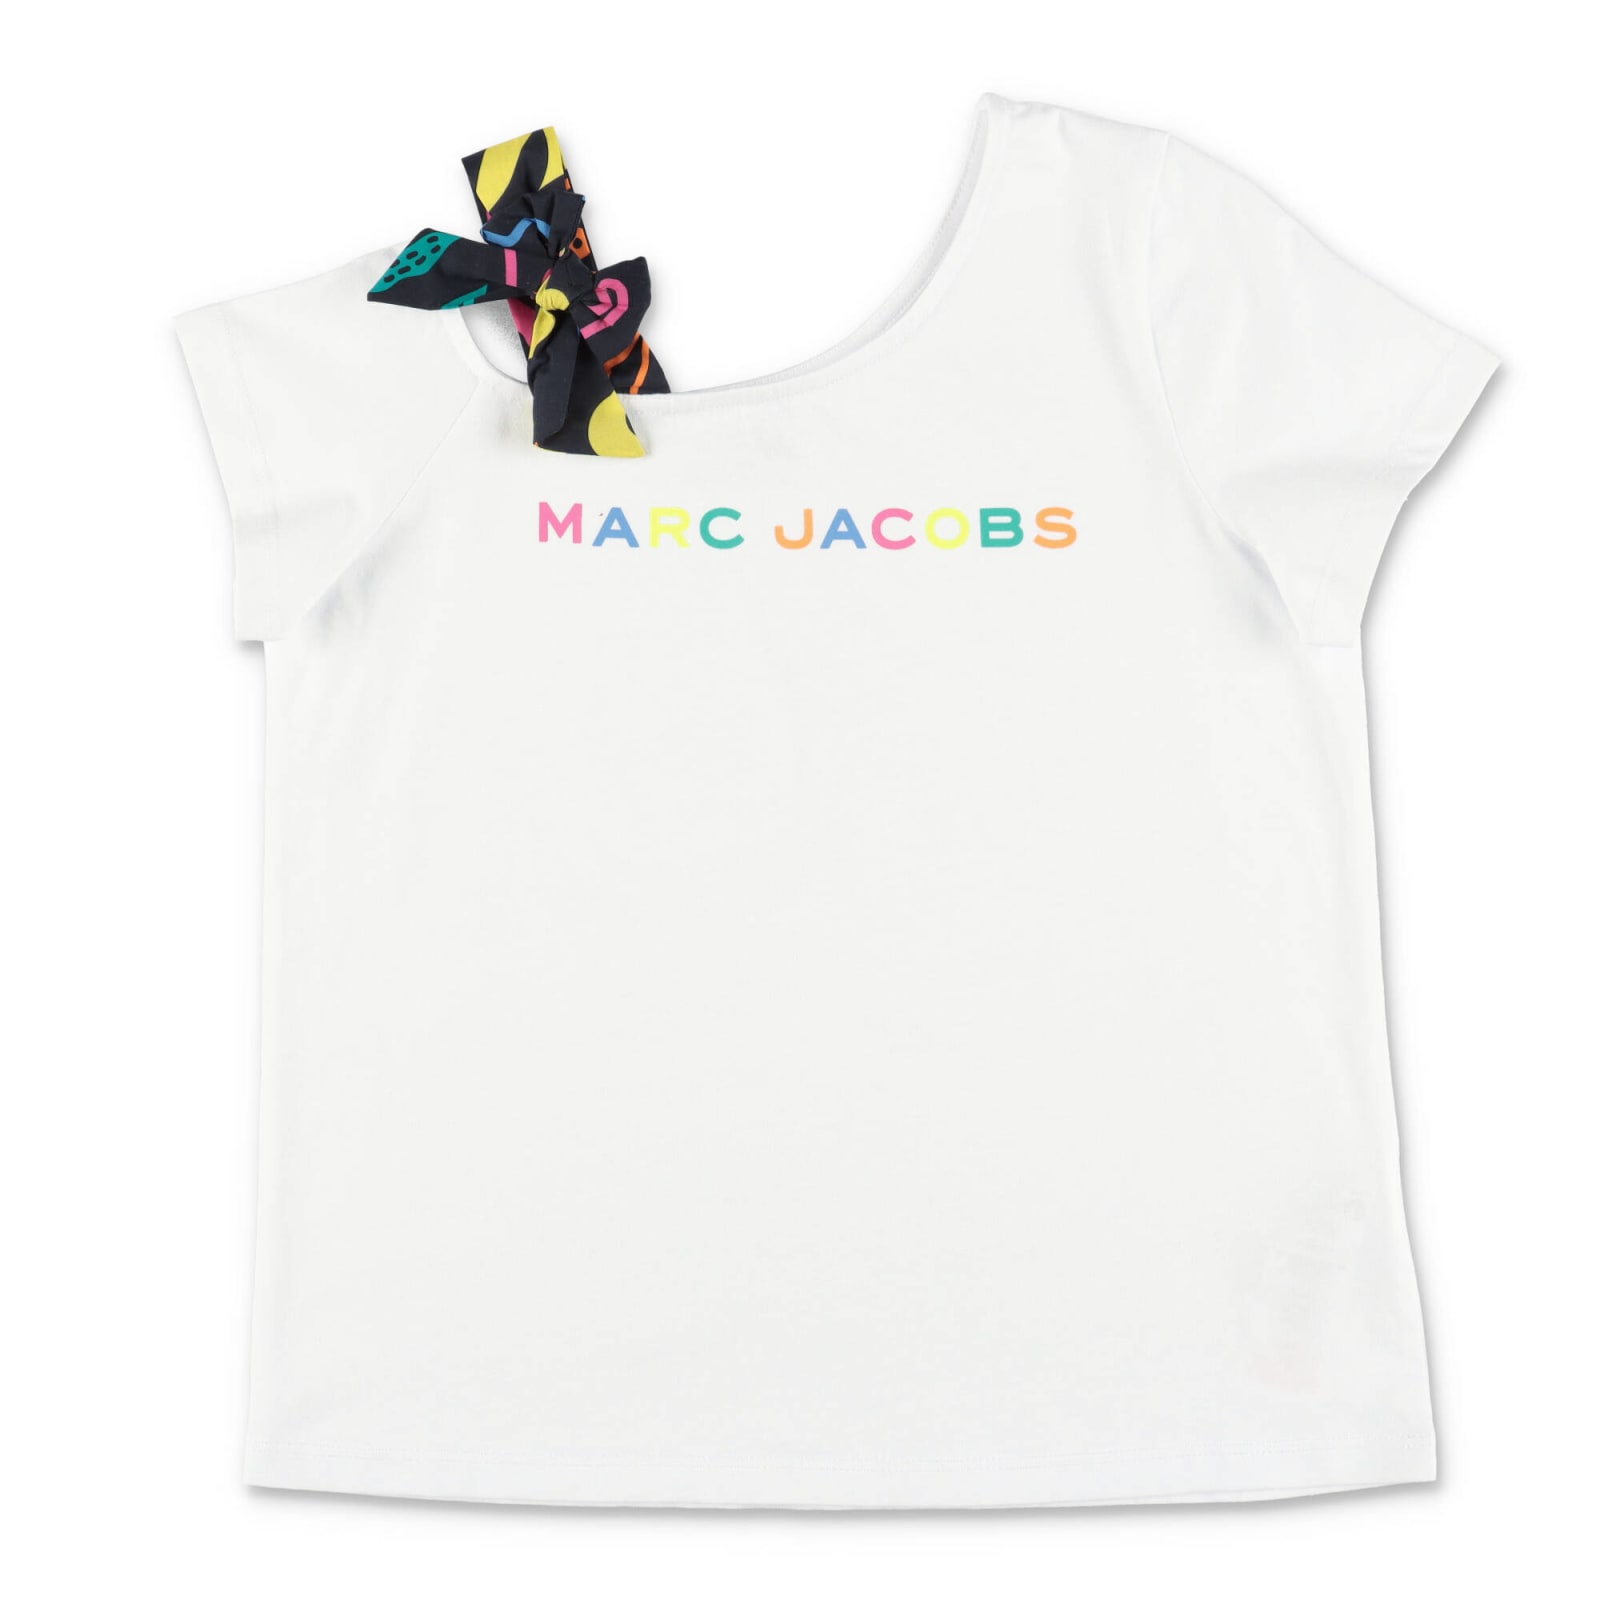 MARC JACOBS MARC JACOBS T-SHIRT BIANCA IN JERSEY DI COTONE